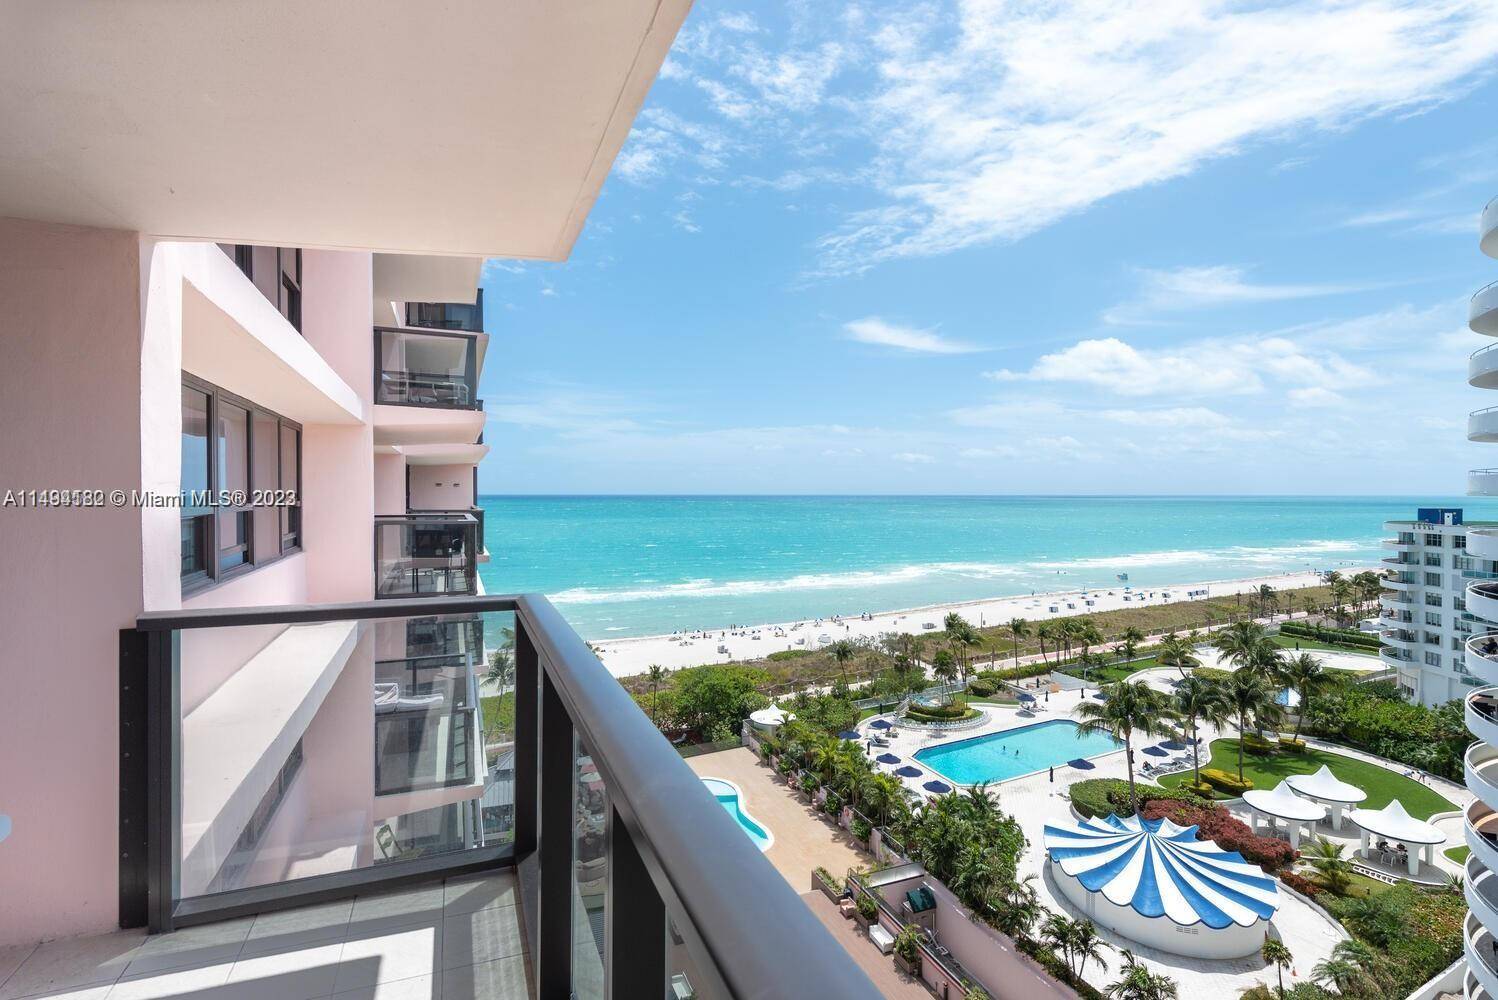 FULLY FURNISHED MONTH TO MONTH AVAILABLE FOR 5500 DAILY RENTAL AVAILABLE OCEAN VIEW AND INTERCOASTAL VIEW INCLUDED WITH RENTAL 1 PARKING WATER ELECTRICITY CABLE UNIT FEATURES ALL PORCELAIN TILE' BALCONY ...